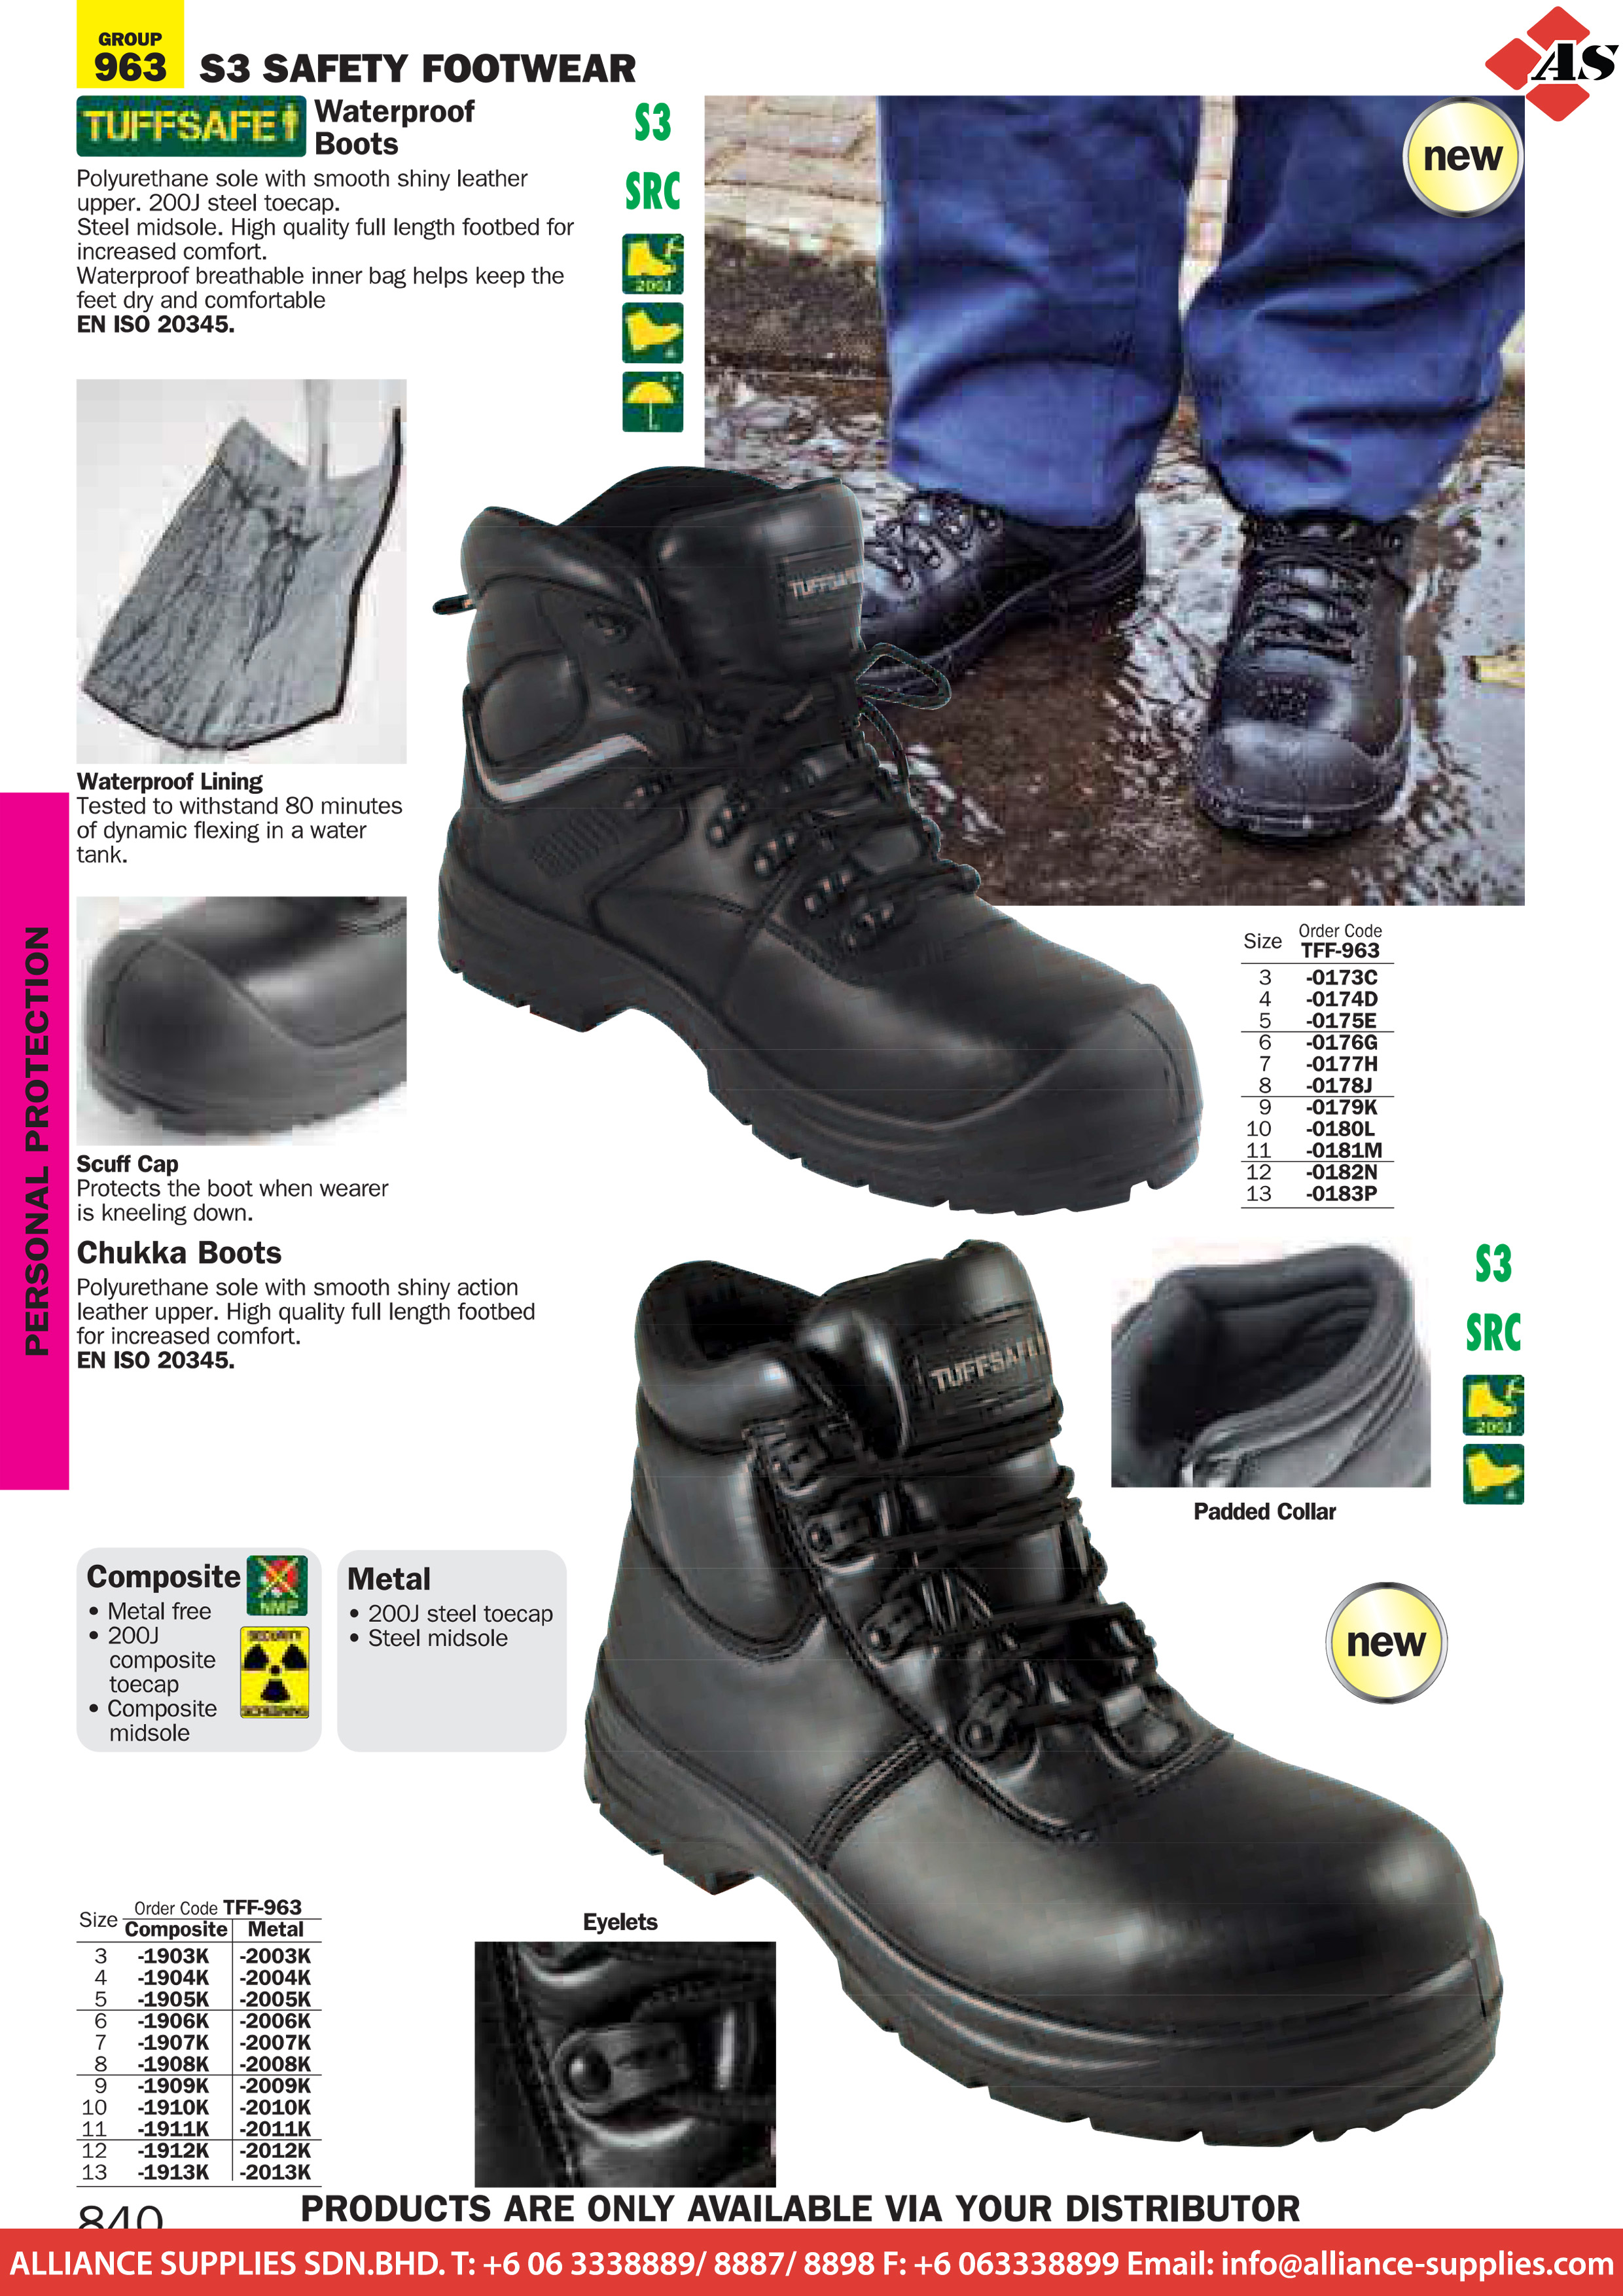 cromwell safety shoes